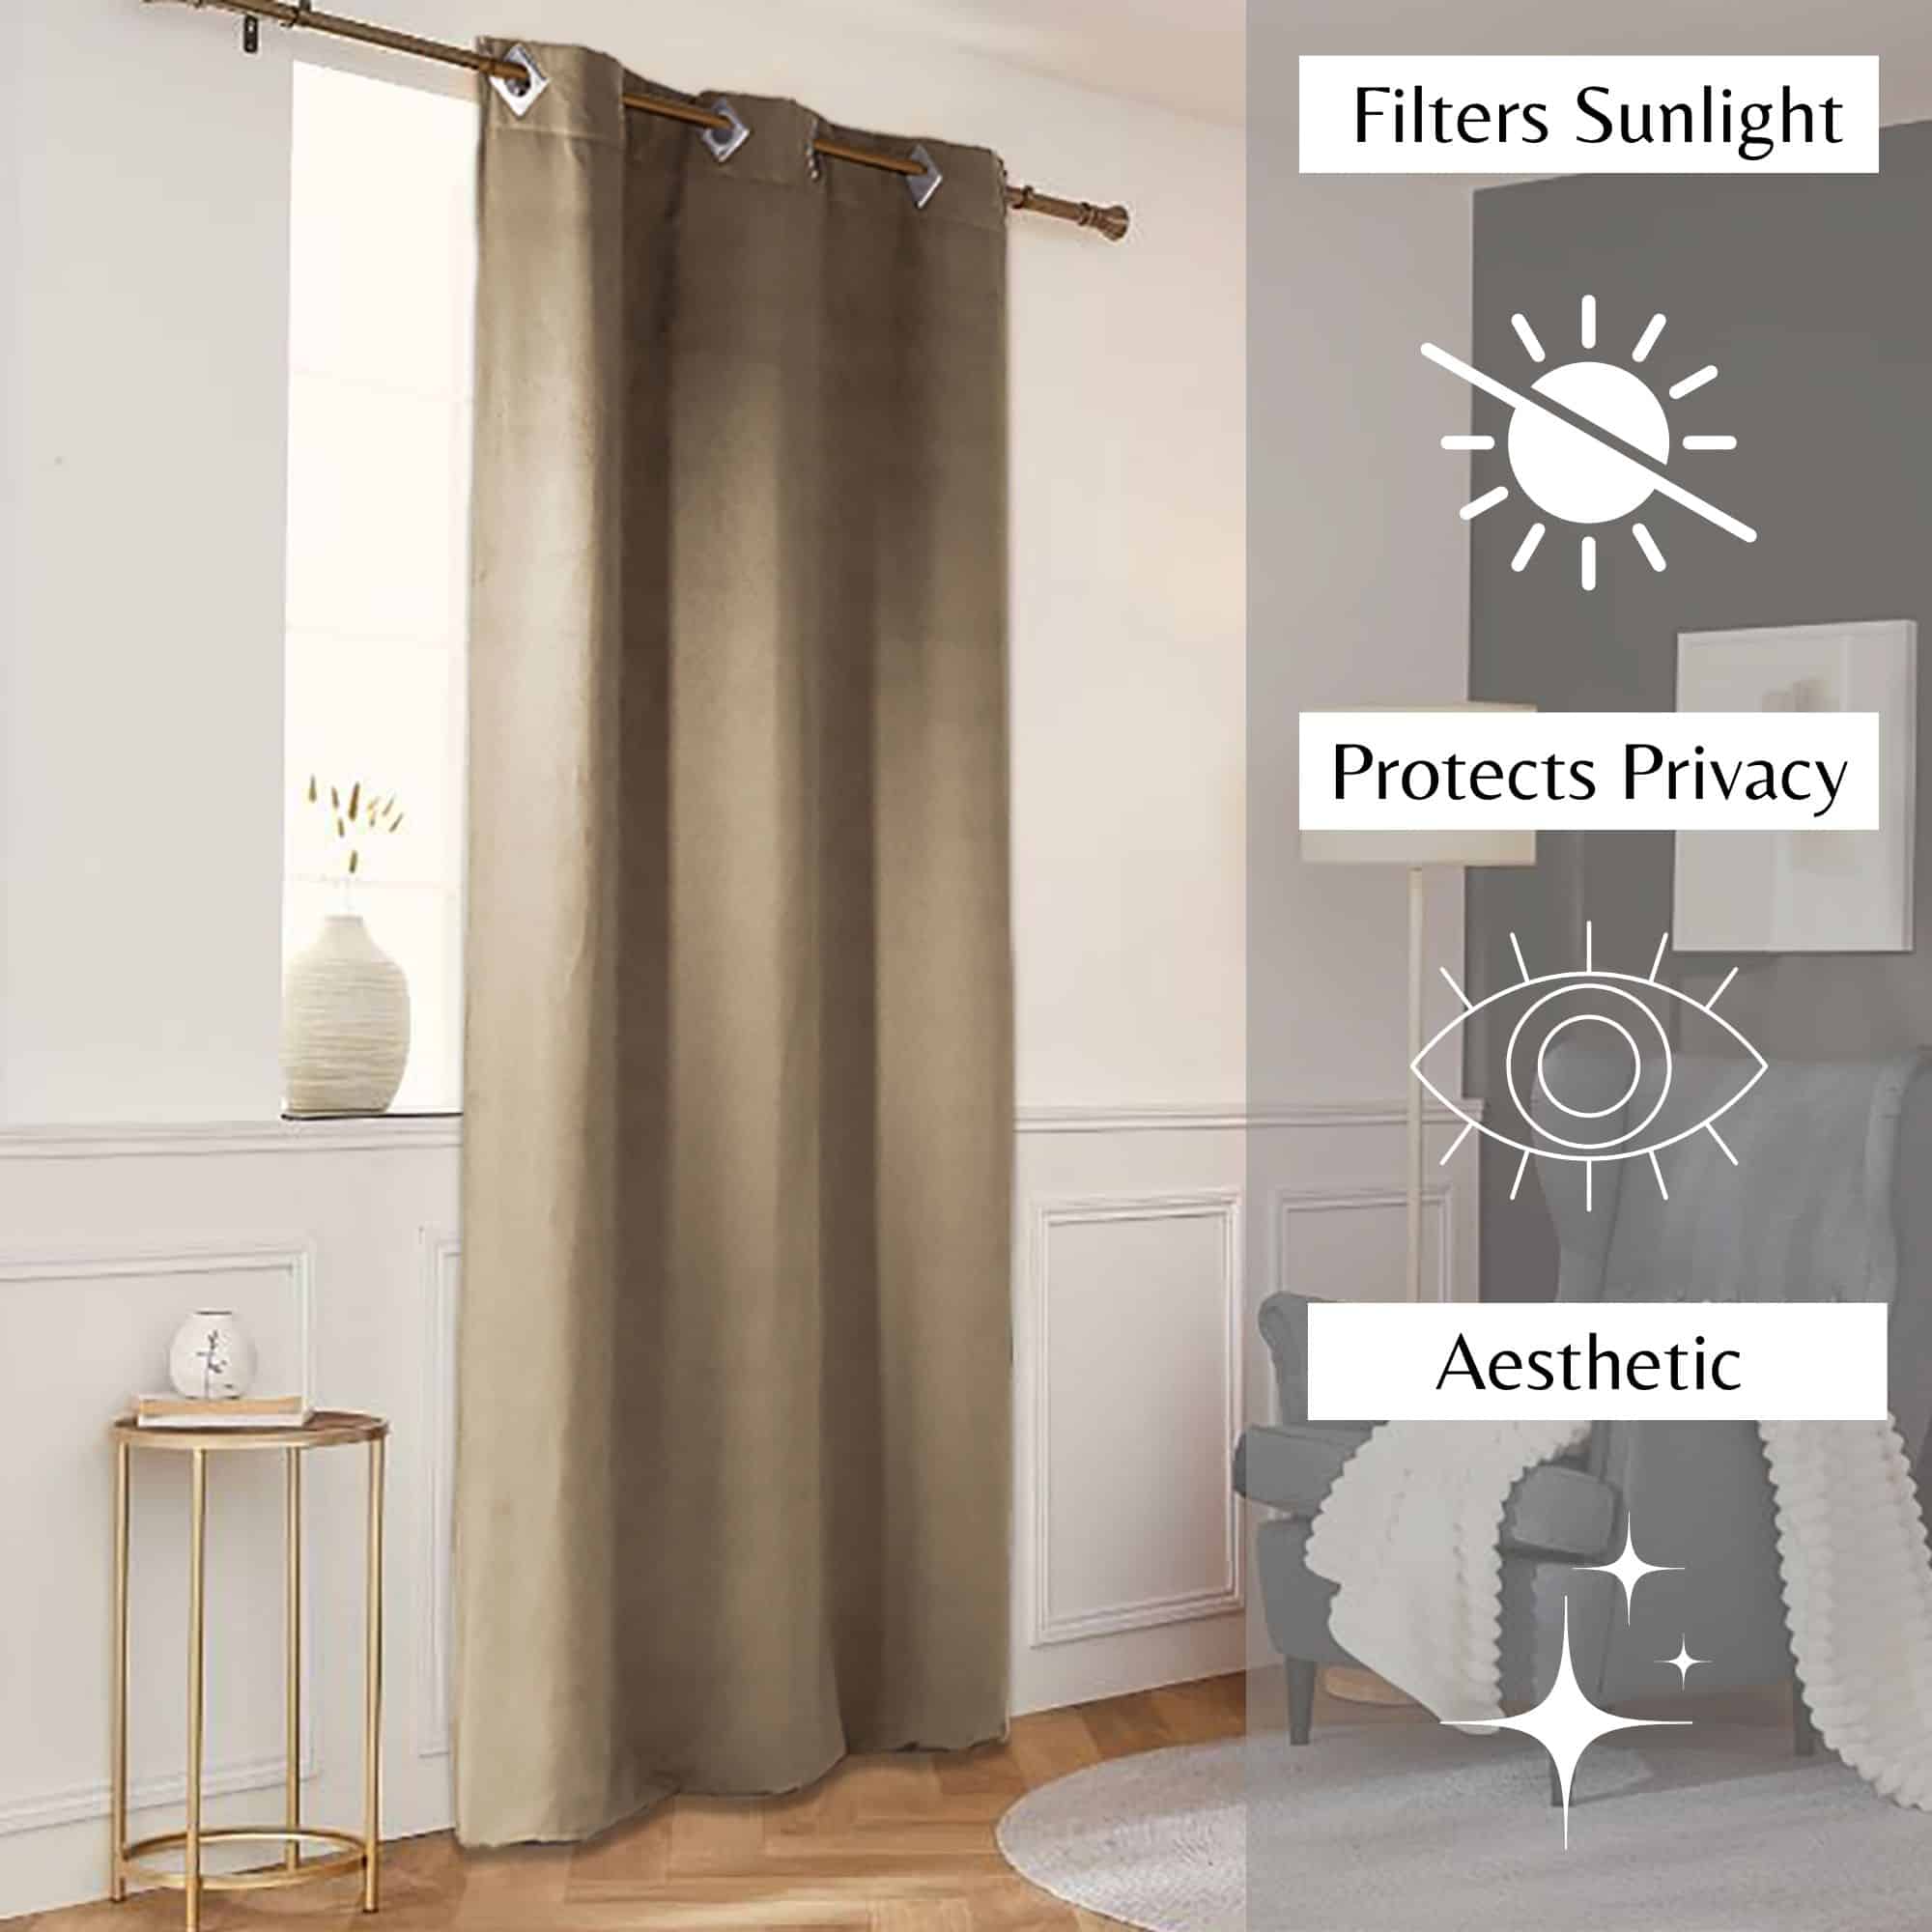 filters sunlight protects privacy aesthetic light brown curtain panel for modern interior 1 piece